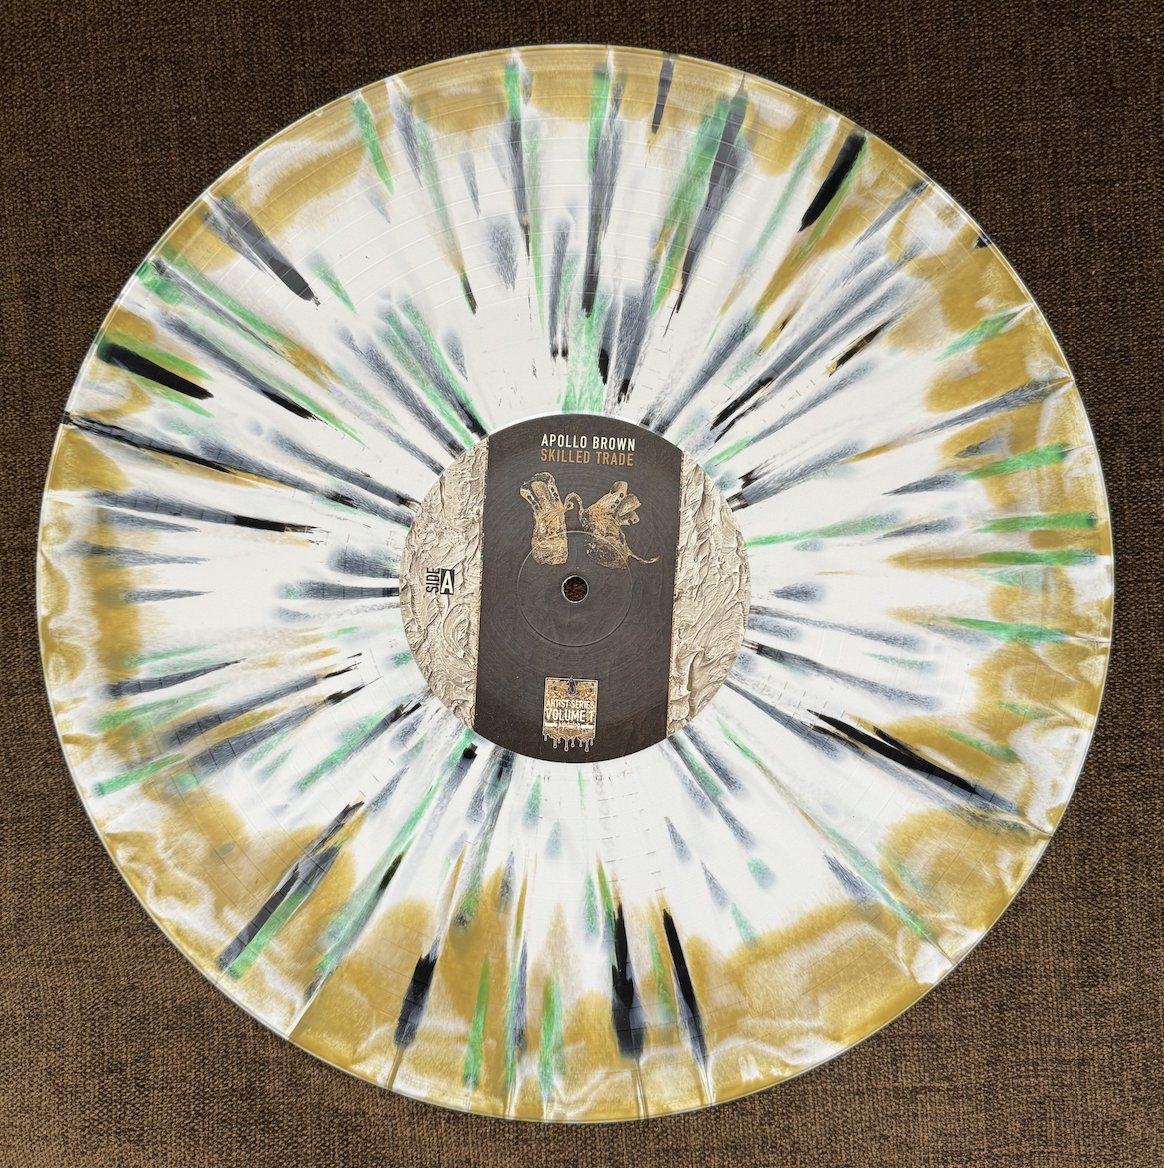 The long-awaited @ApolloBrown vinyl for 'Skilled Trade' lands May 10th This is a one time special edition pressing: mellomusicgroup.com/collections/pr…